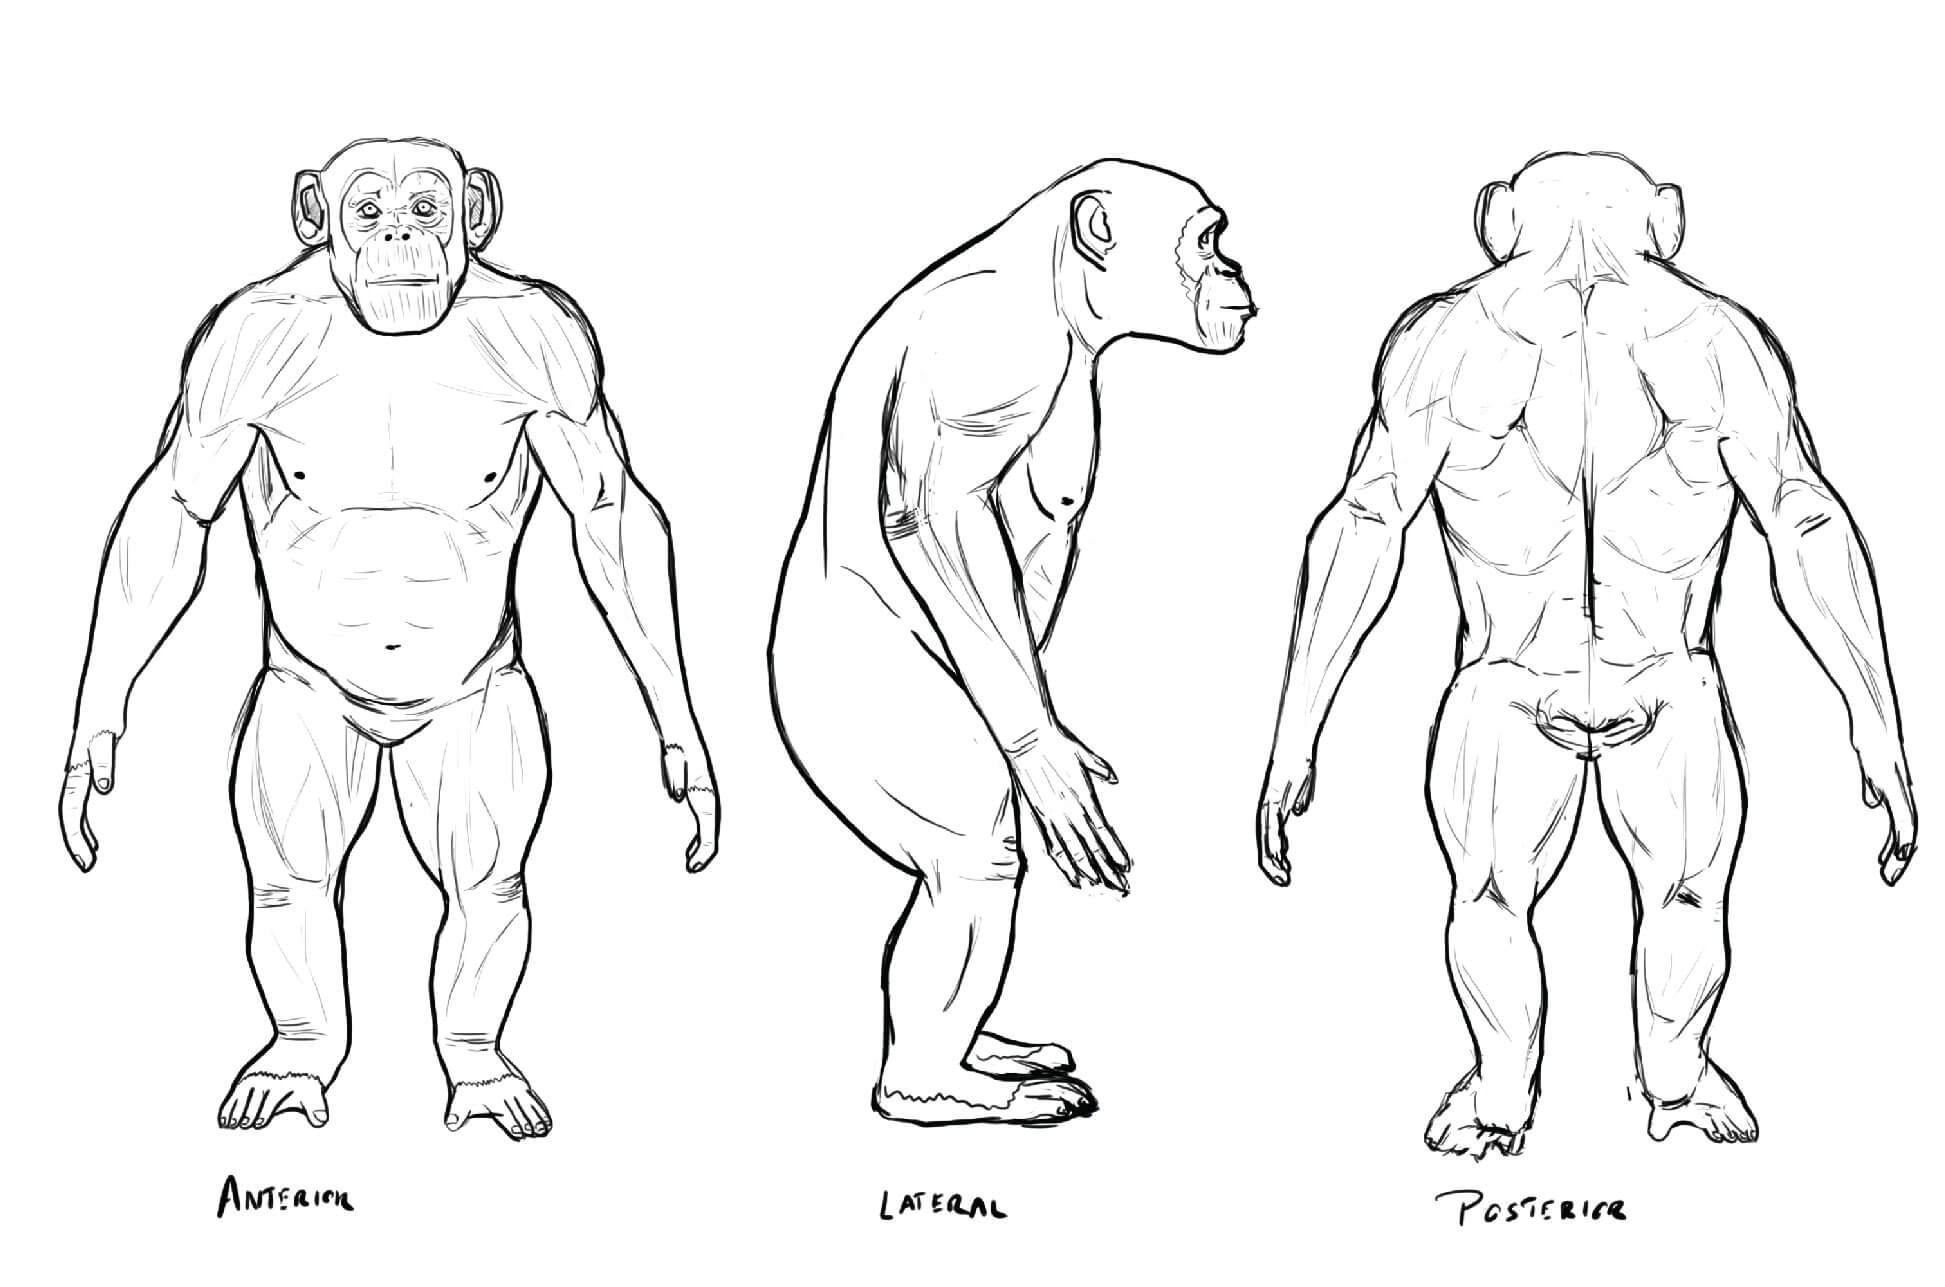 Anterior, lateral, and posterior sketches of the chimpanzee